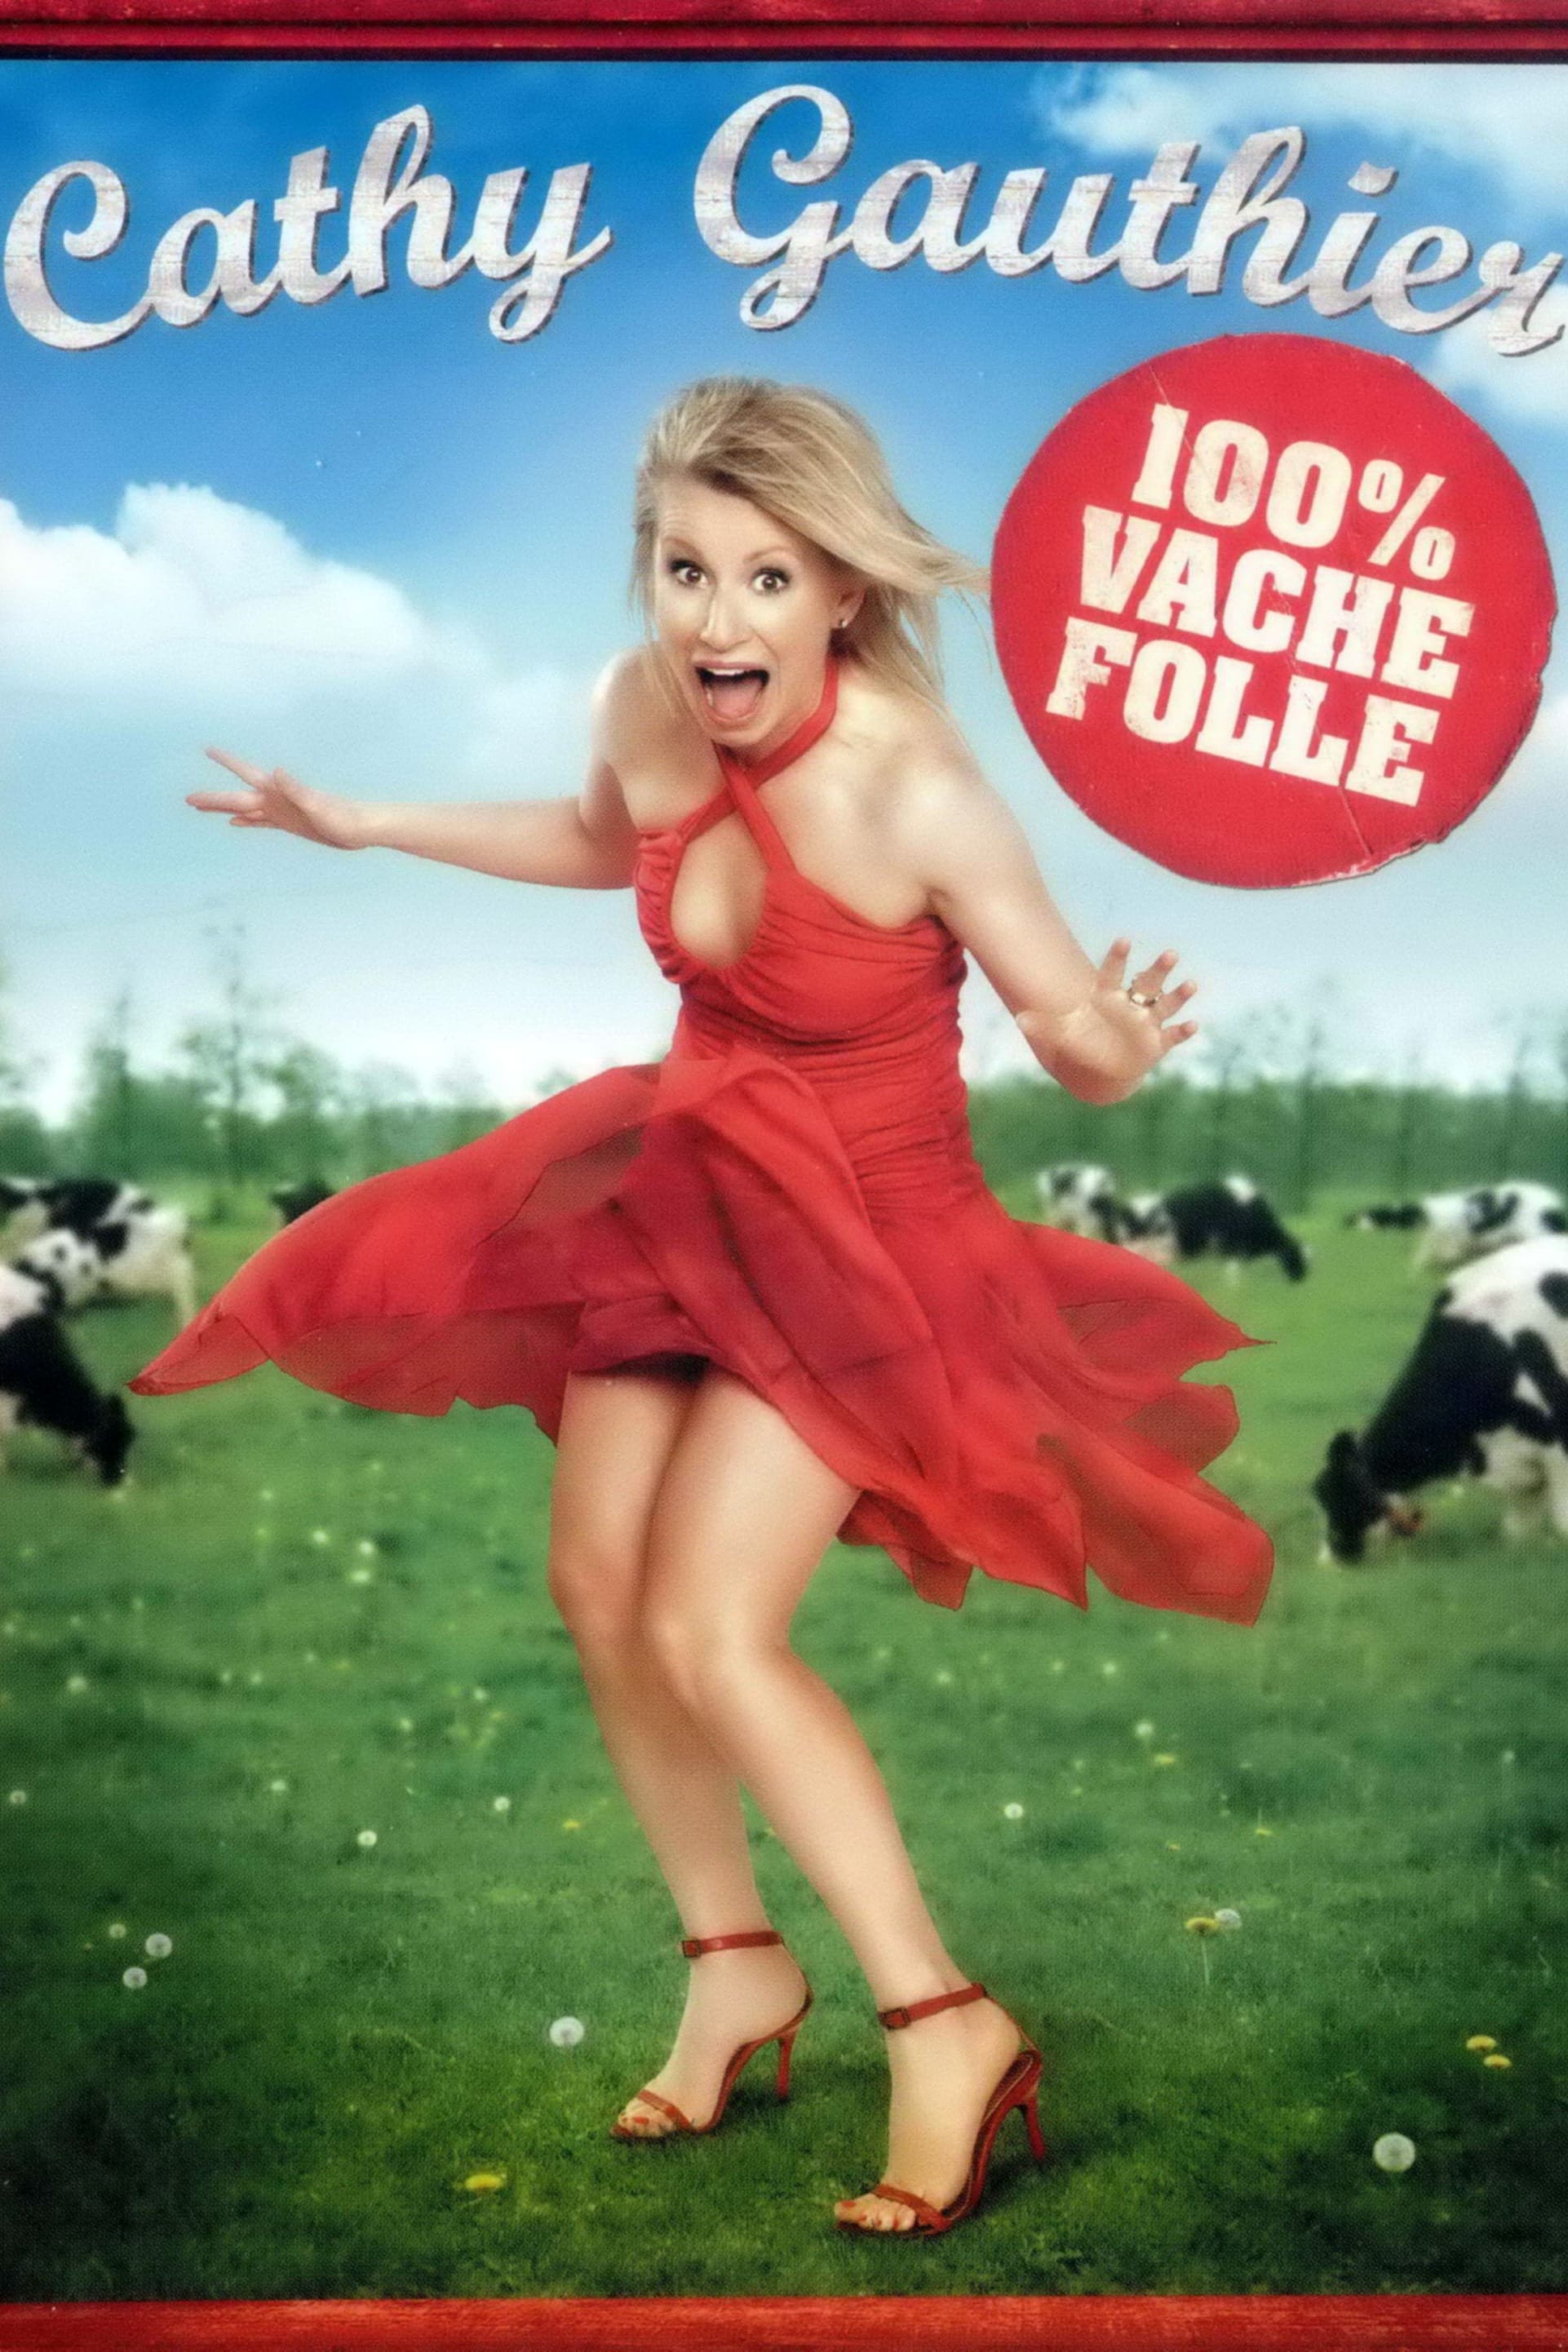 Cathy Gauthier: 100% vache folle